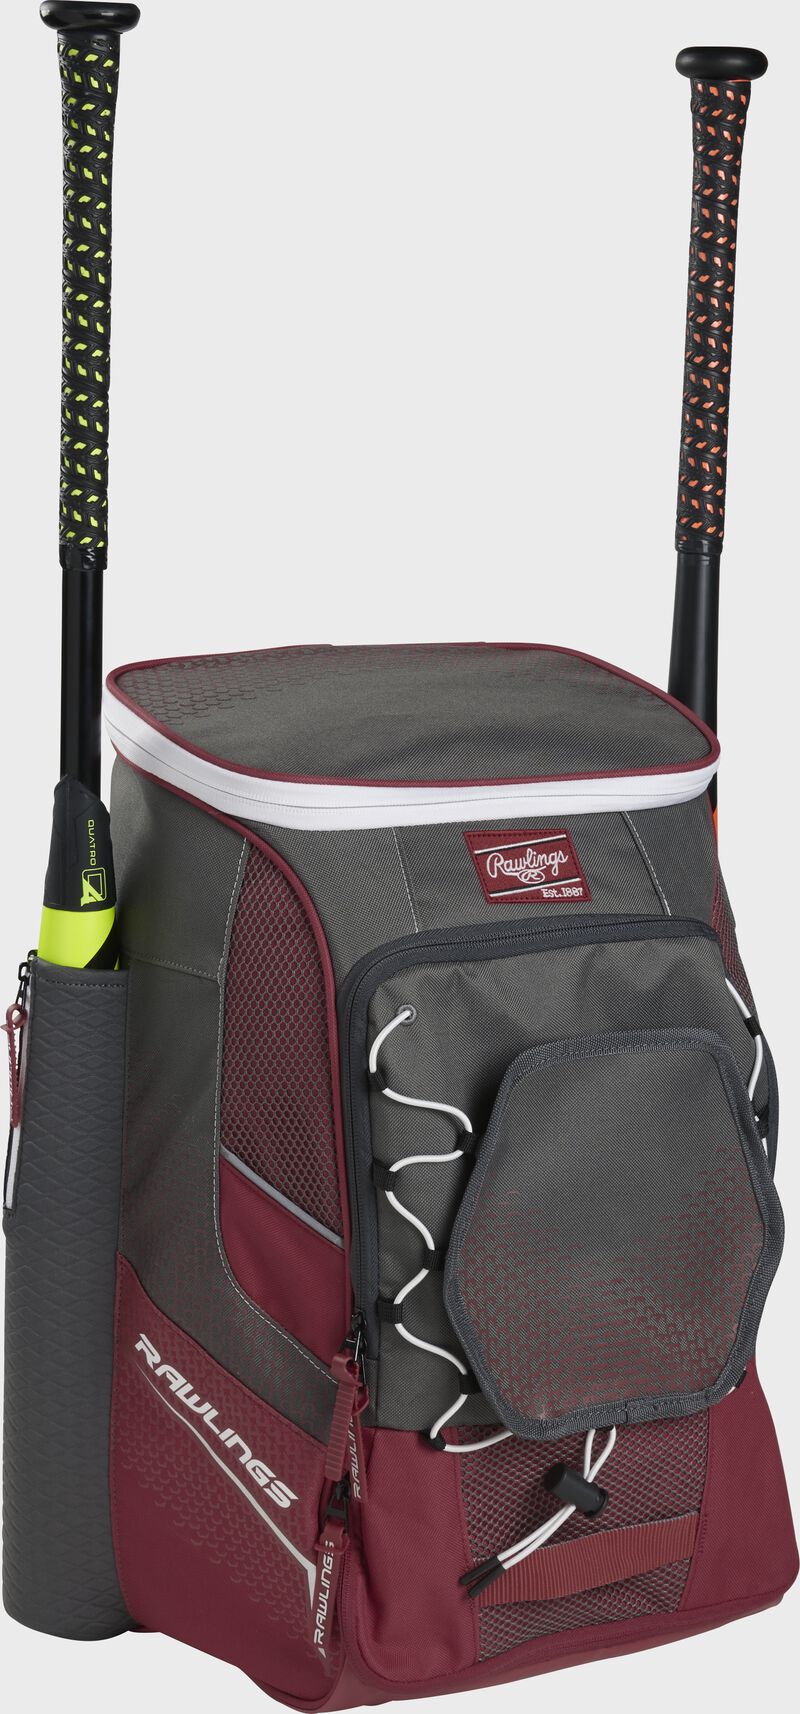 Front left angle of a cardinal Rawlings Impulse baseball gear backpack with two bats - SKU: IMPLSE-C image number null